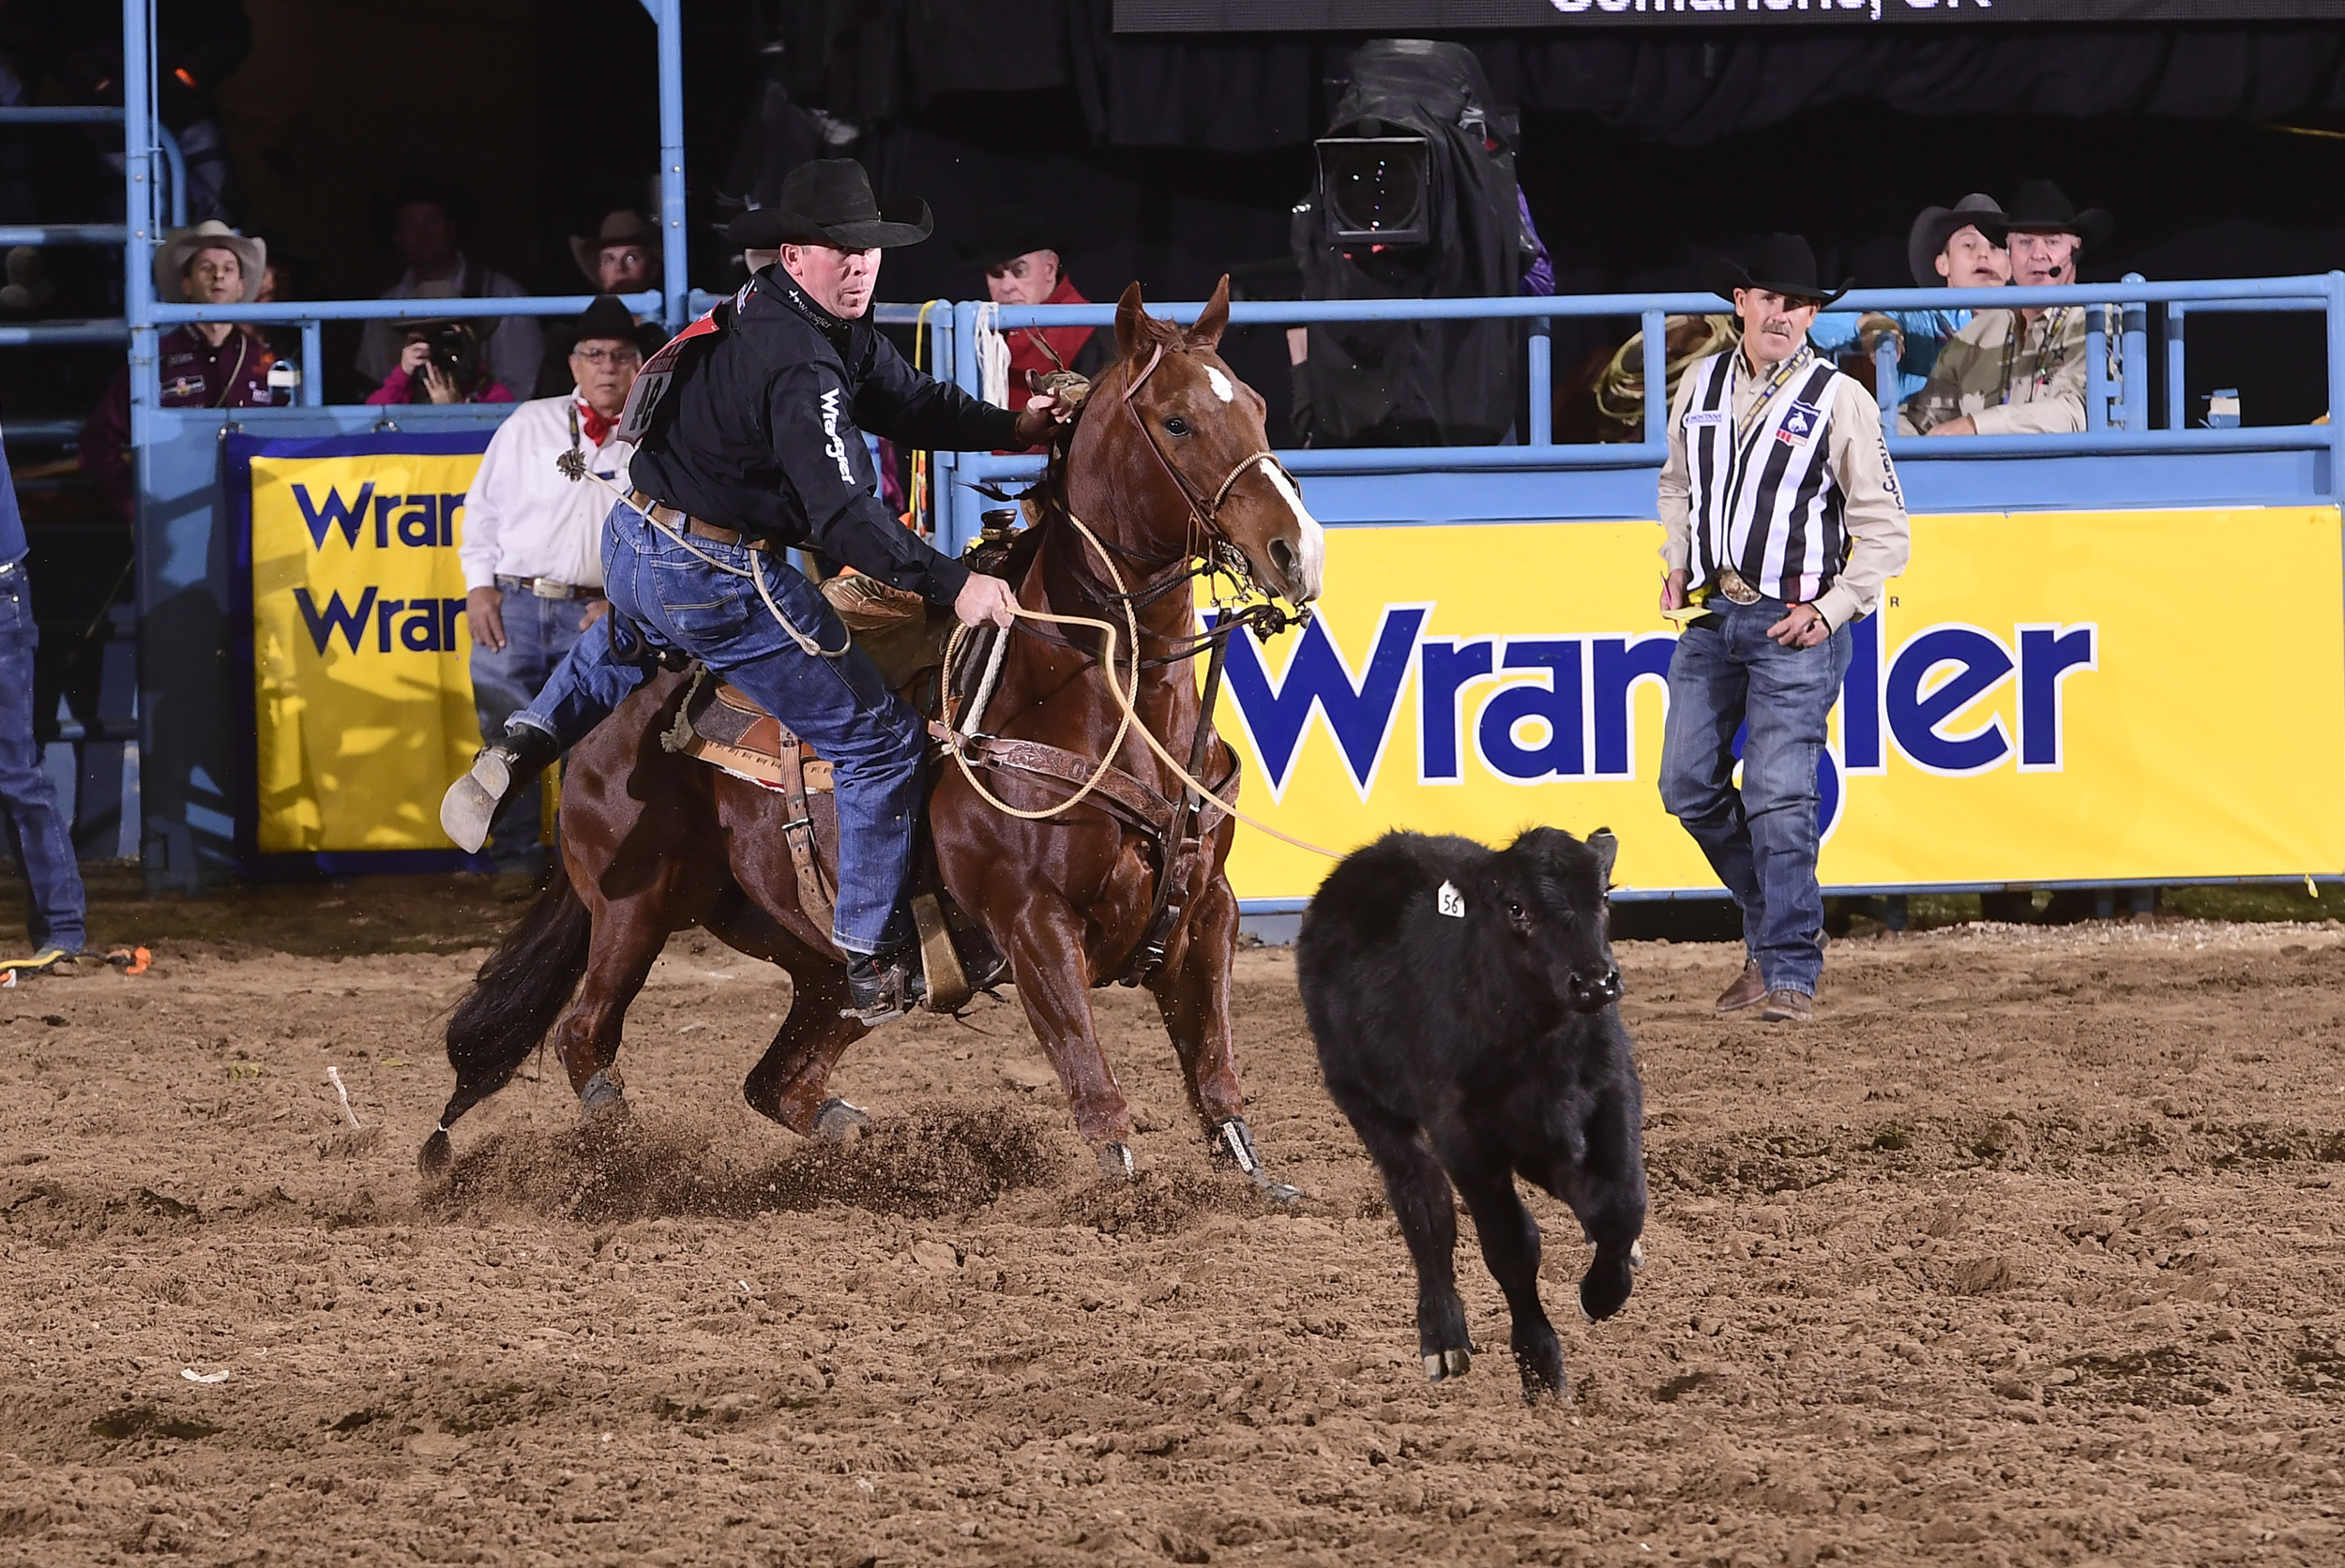 Tie-down roper Ryan Jarrett ropes his calf en route to a 7.8-second run Wednesday to finish fourth in the seventh round of the National Finals Rodeo. (PRCA PRORODEO PHOTO BY JAMES PHIFER)